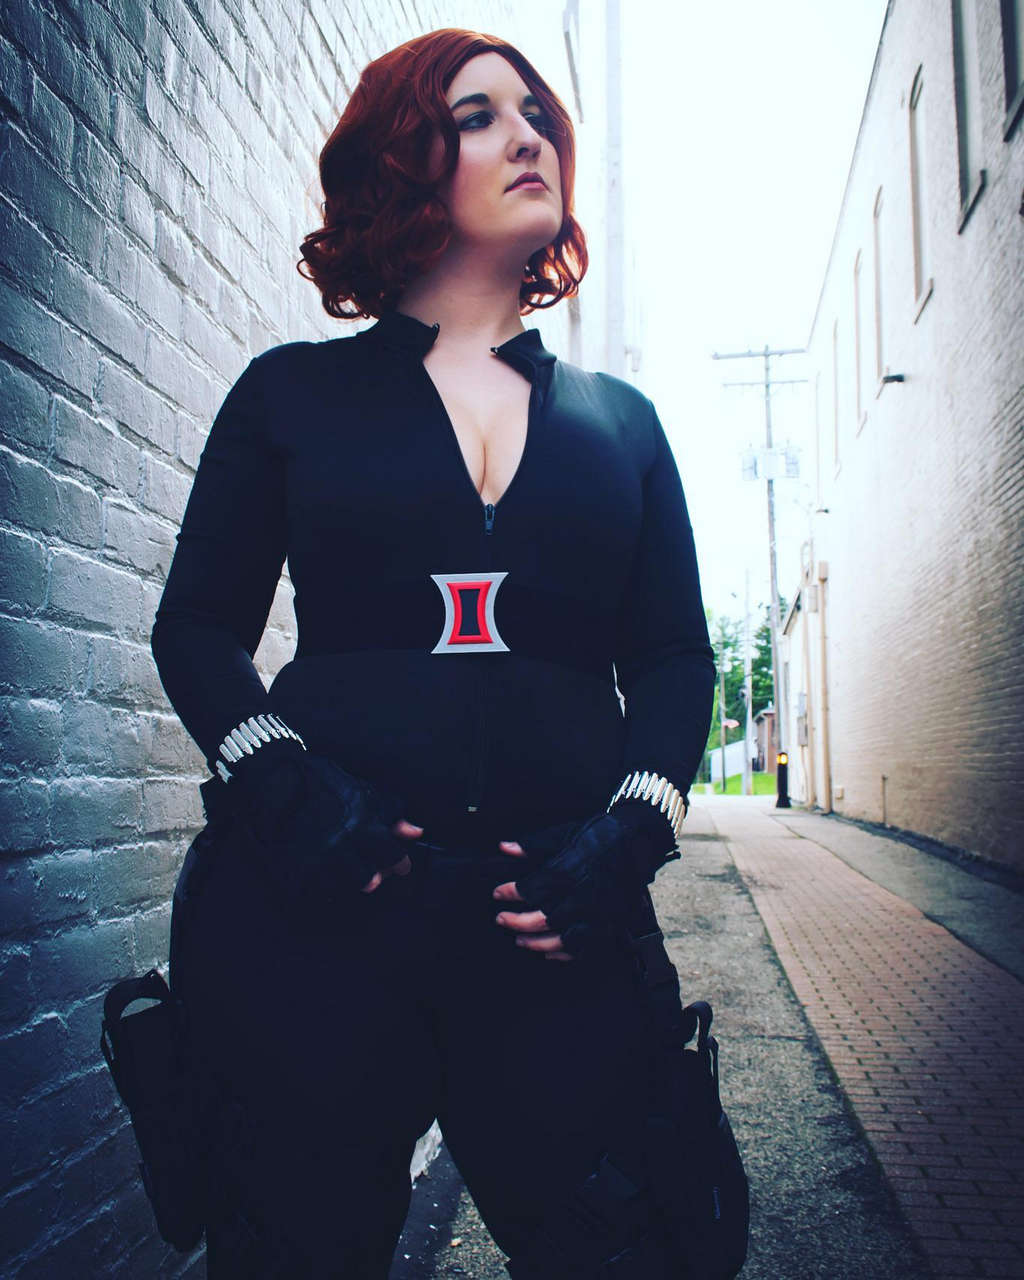 Self Black Widow From Marve